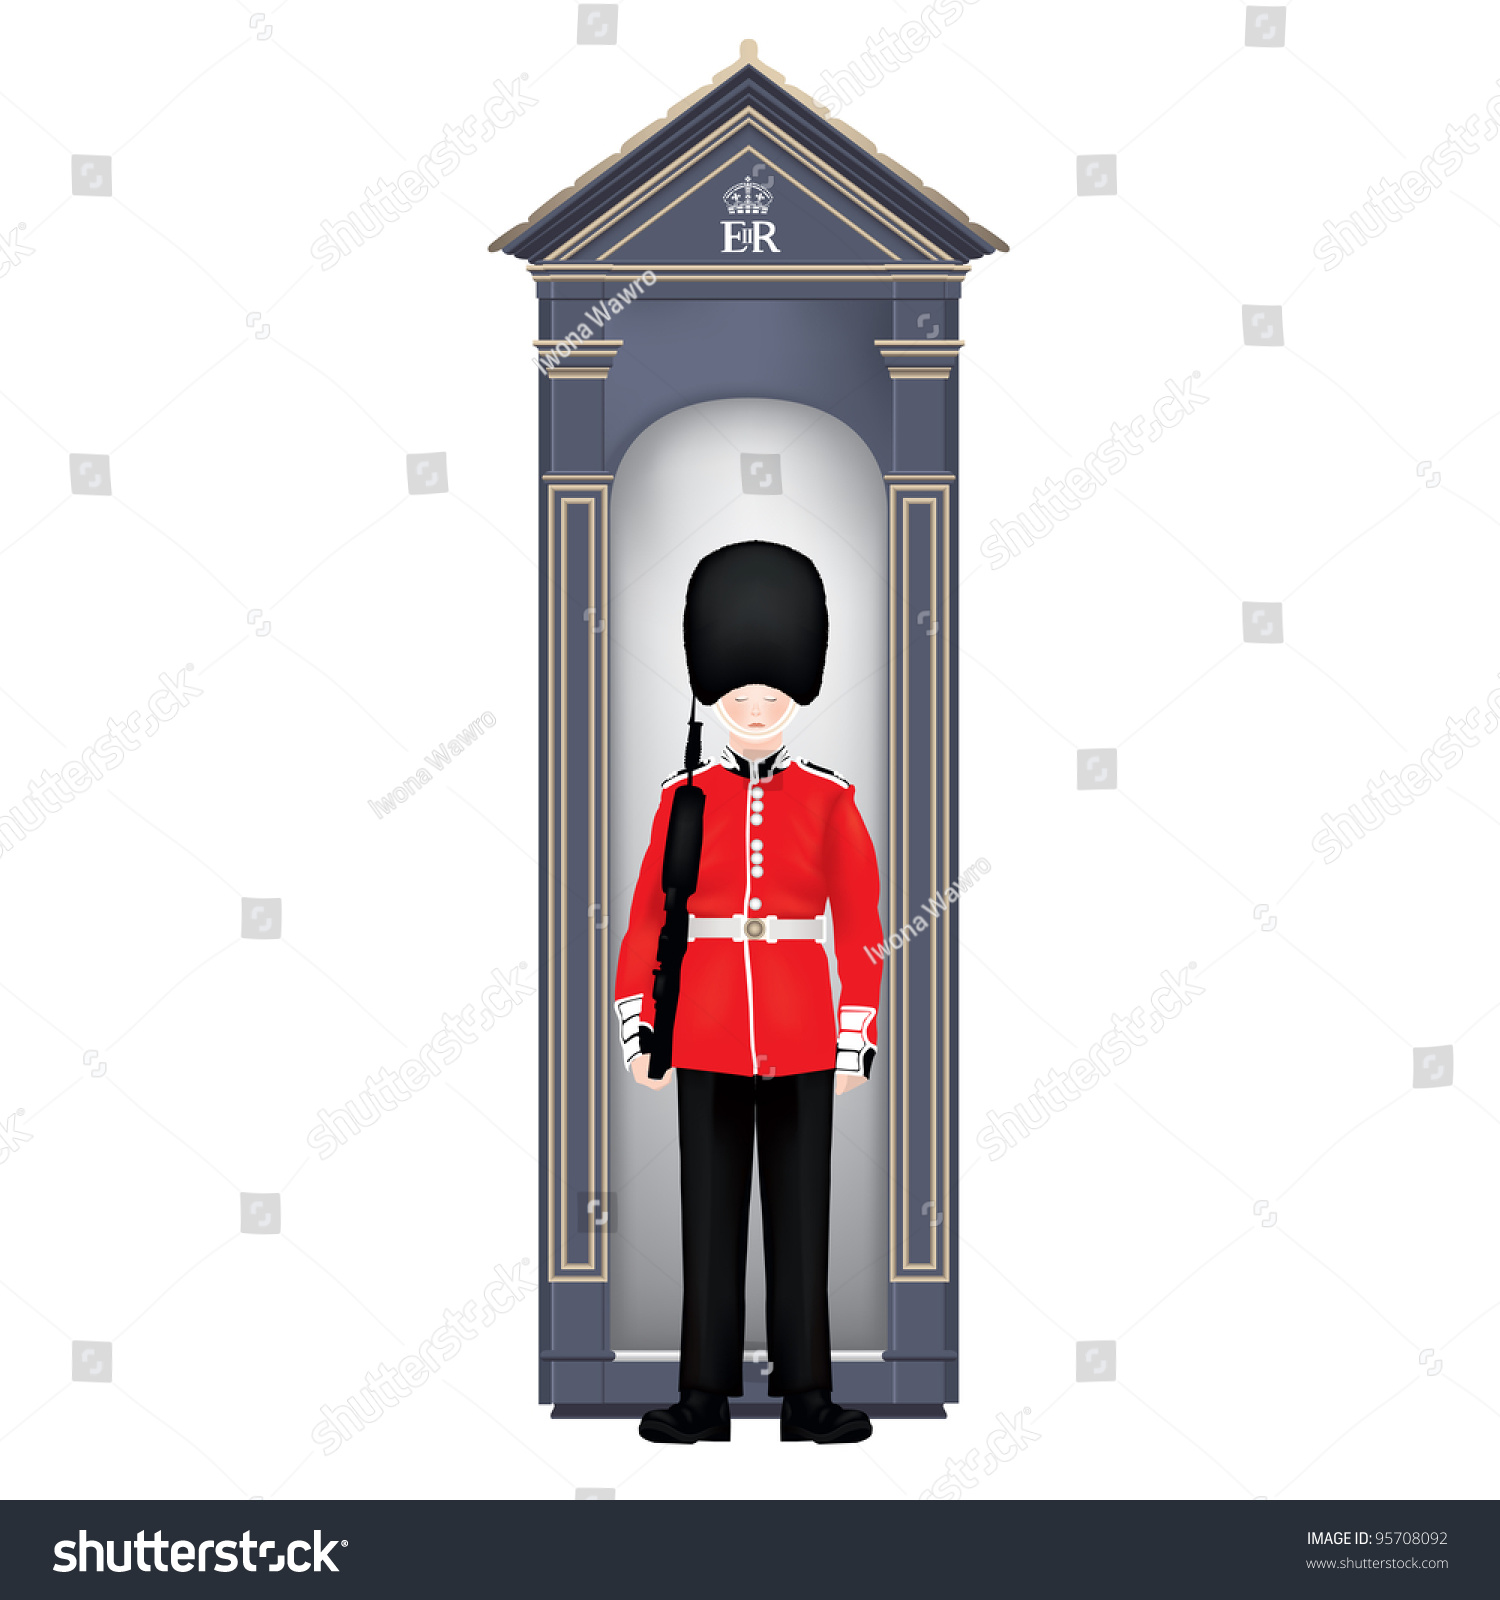 SVG of Beefeater soldier in guardhouse-London-symbols-very detailed iso svg